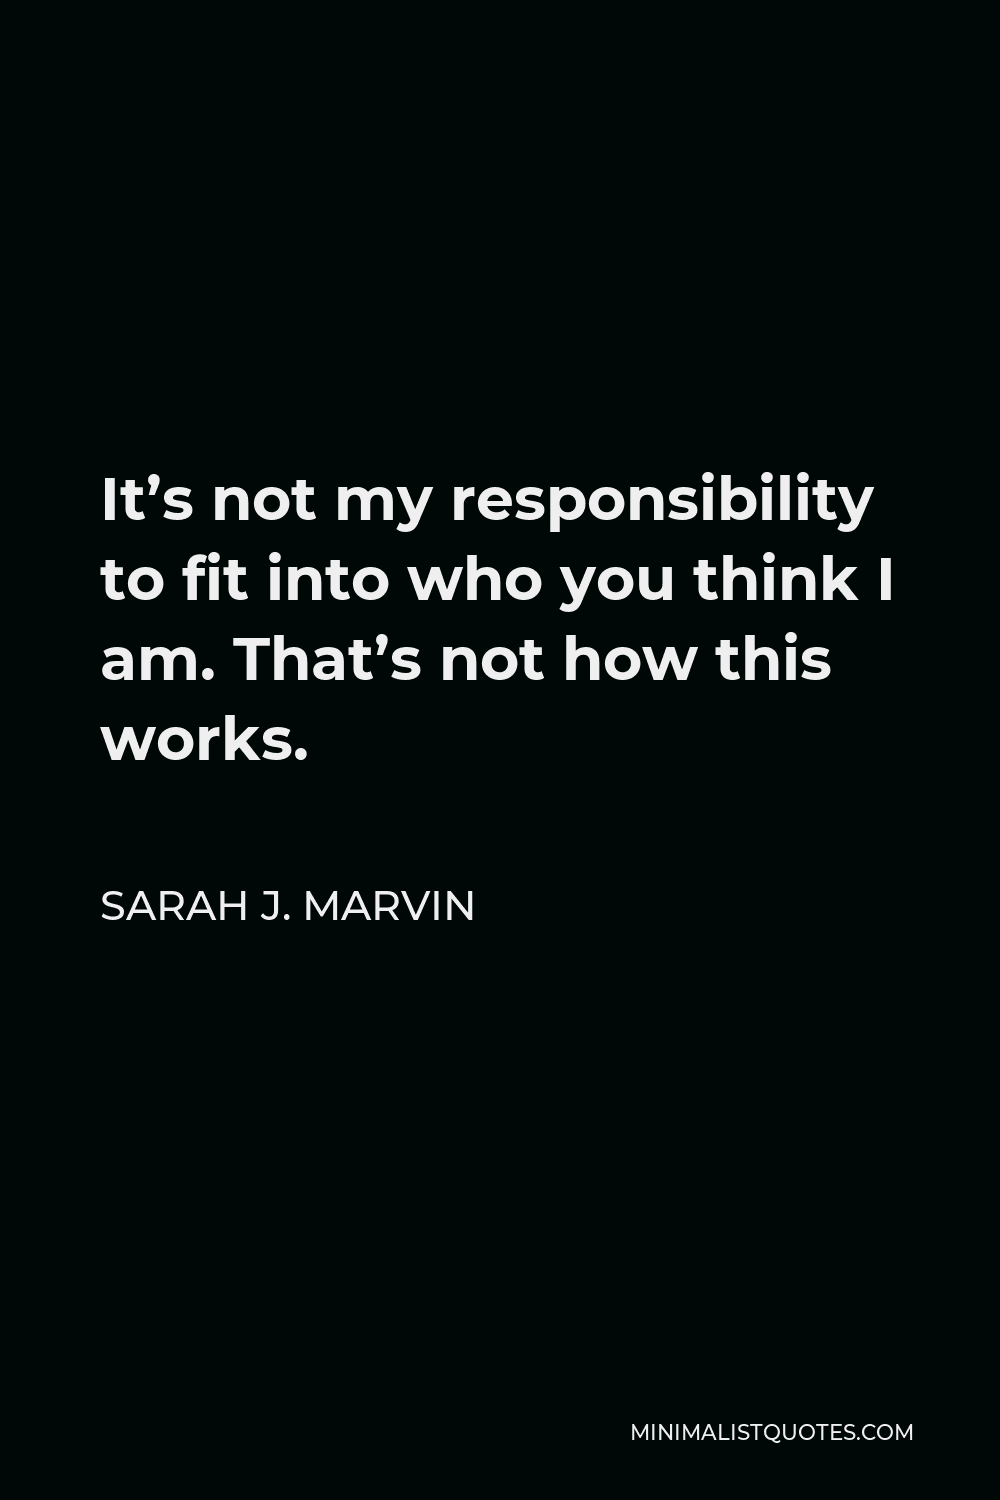 Sarah J. Marvin Quote - It’s not my responsibility to fit into who you think I am. That’s not how this works.